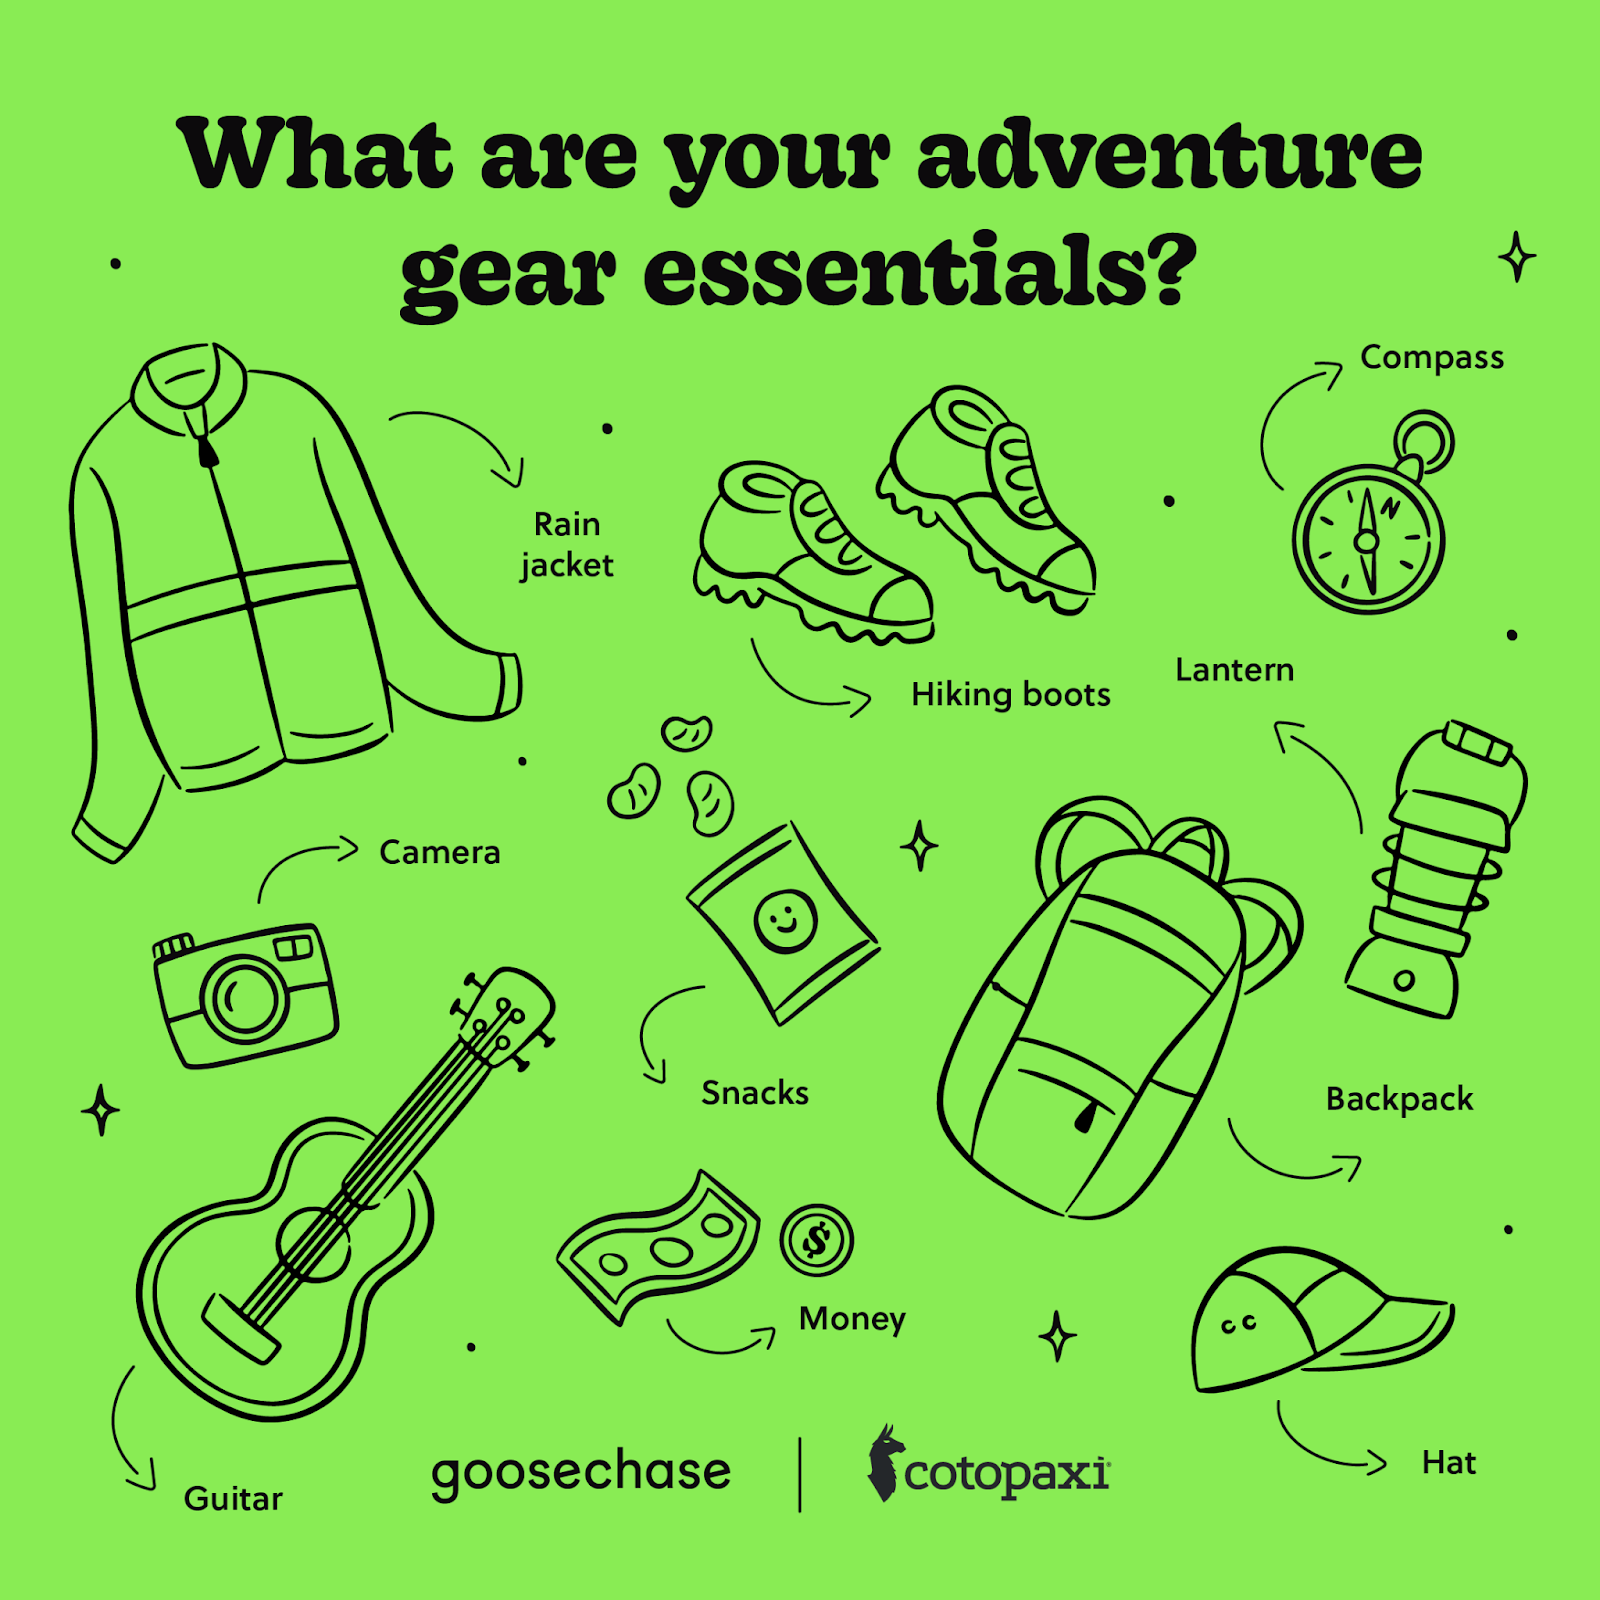 Illustration of hiking accessories like coats and backpacks on a green background with the question 'What are your adventure gear essentials?' written in black type.